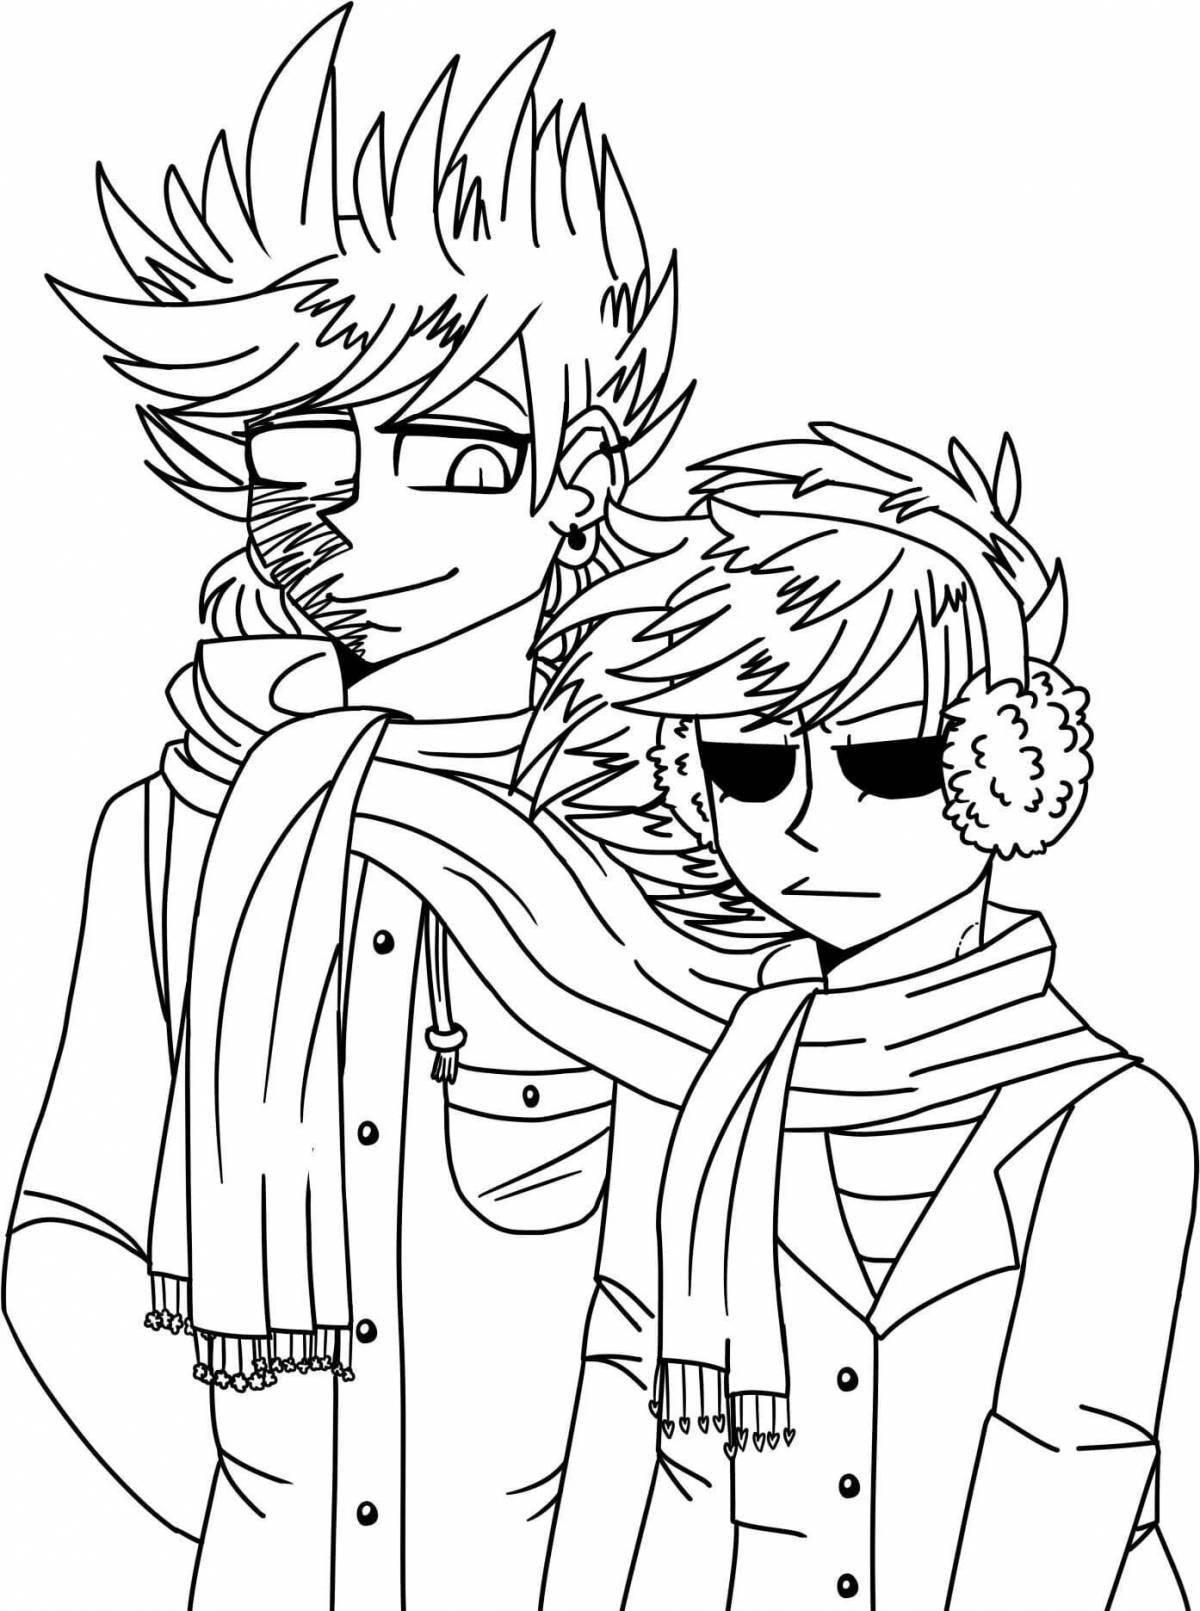 Eddsworld witty coloring book